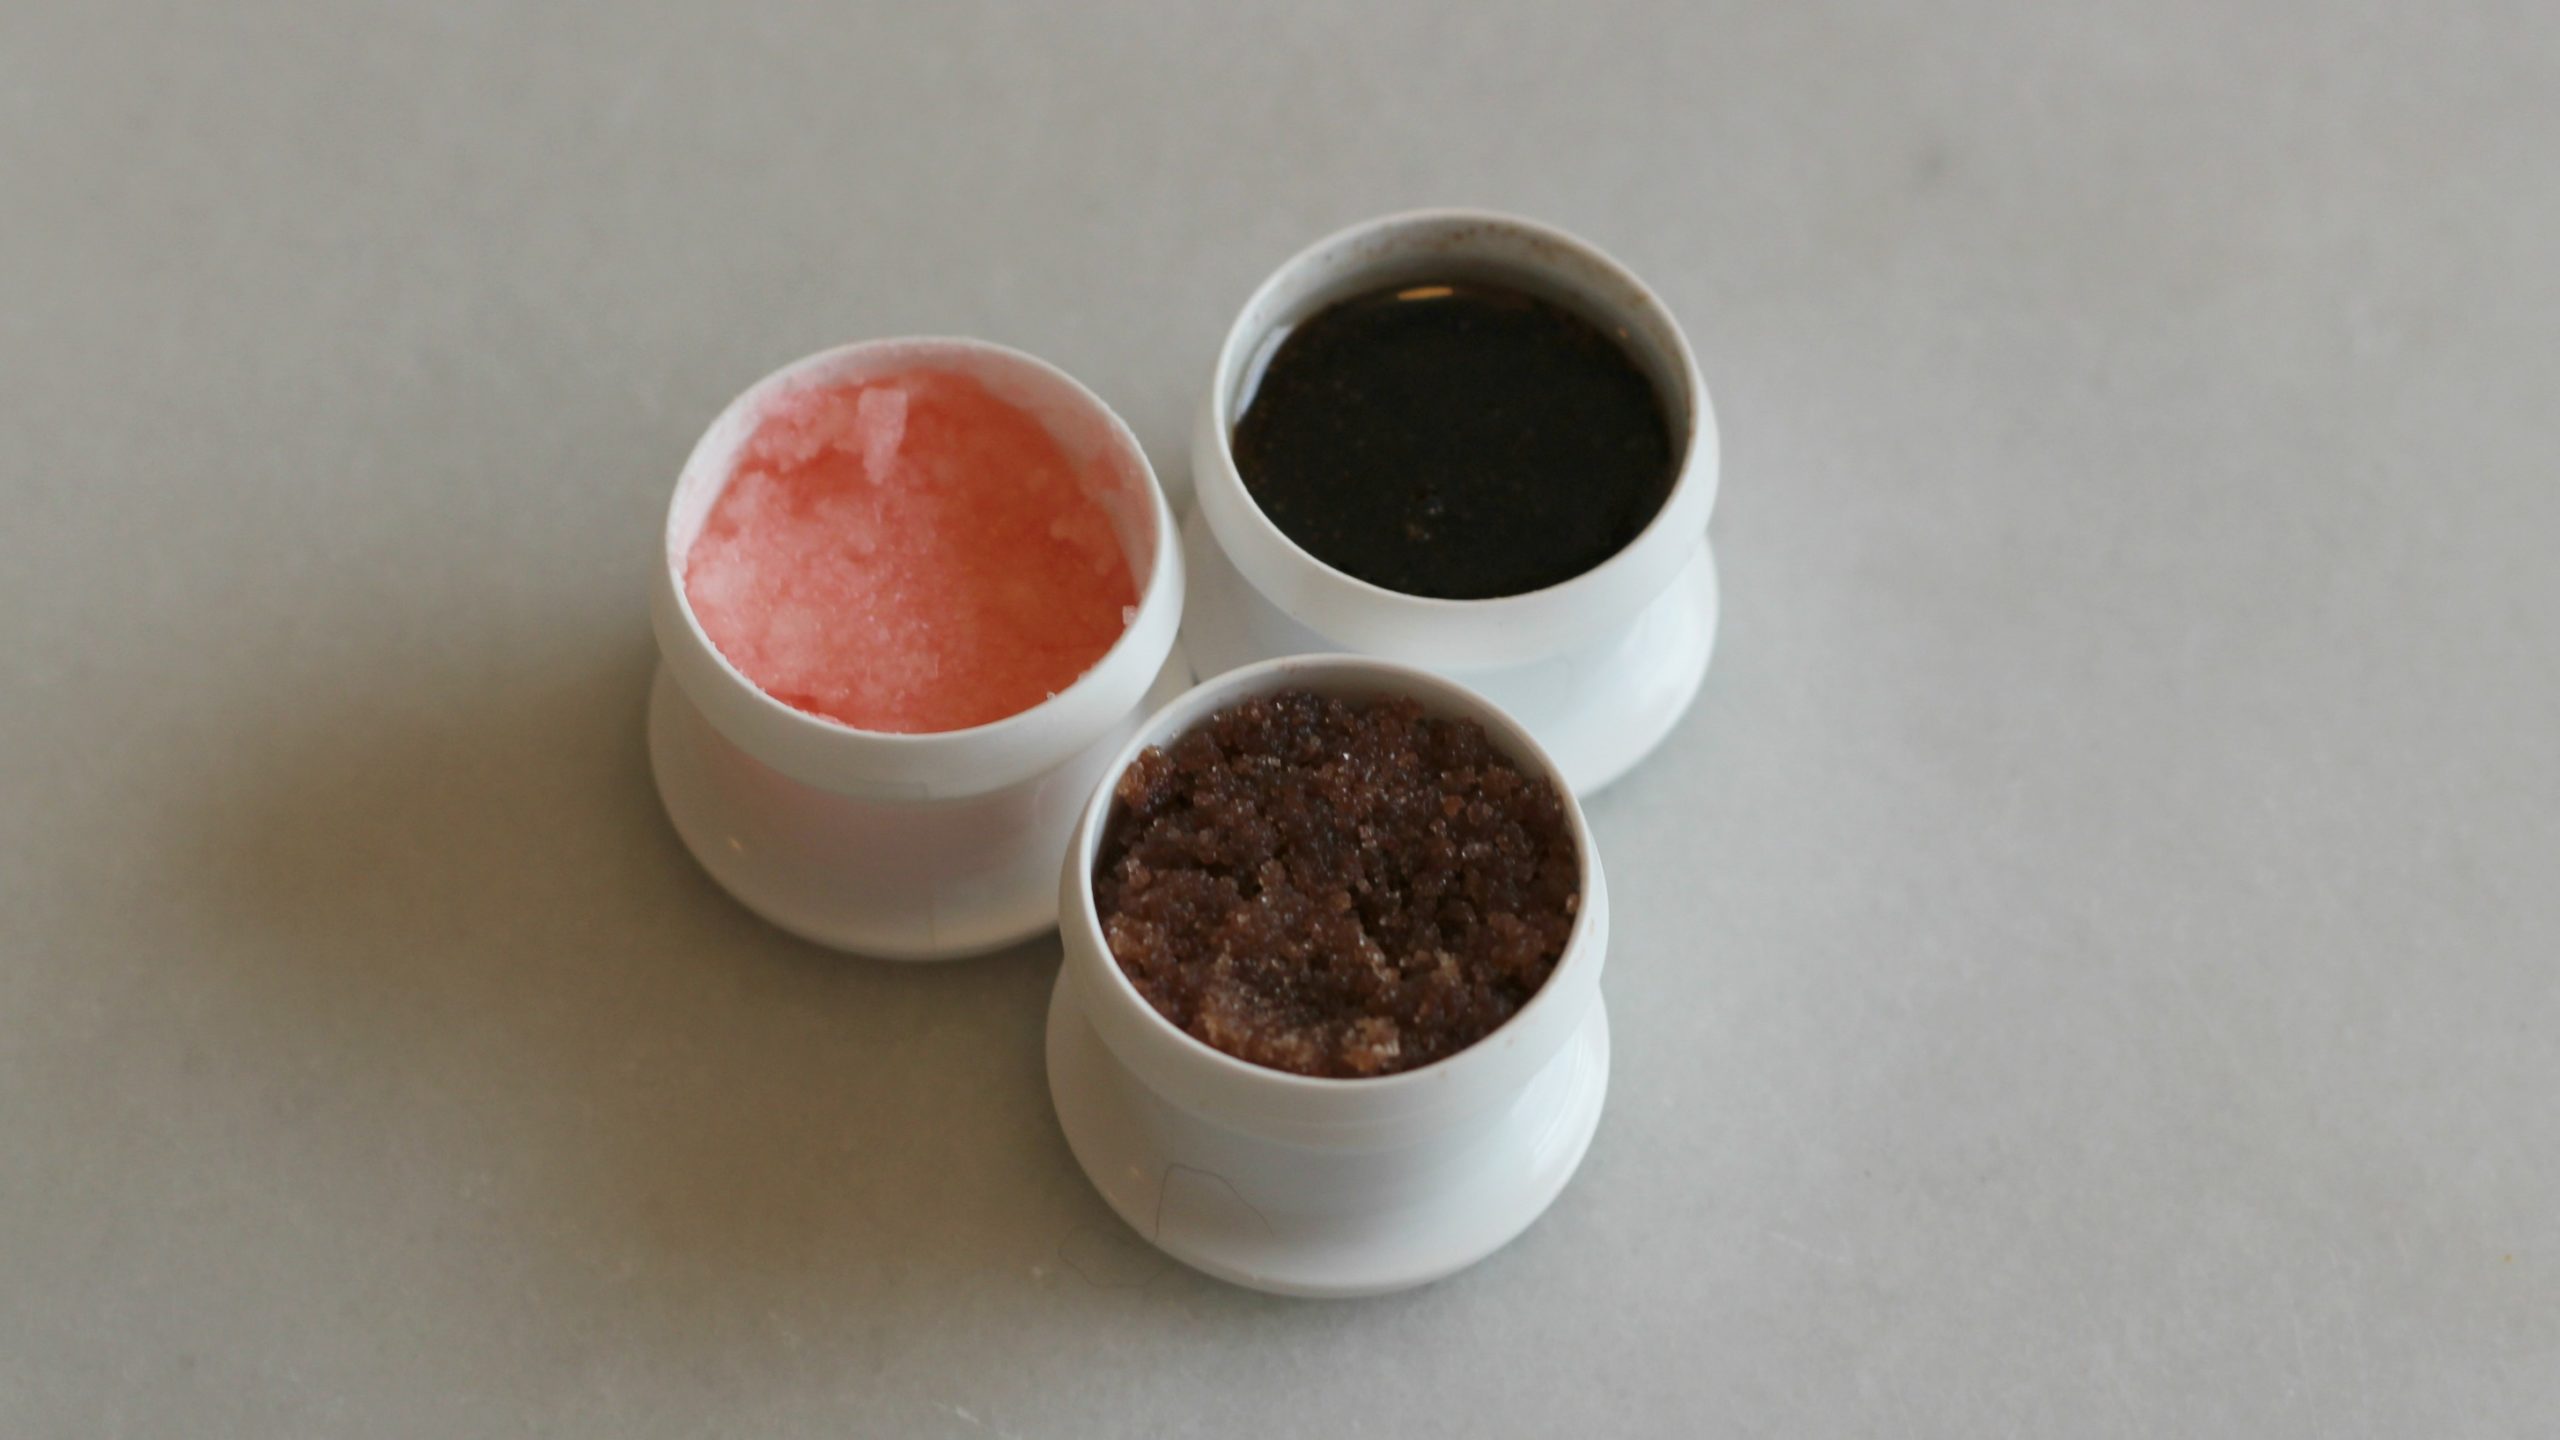 How To Make Gourmet Lip Scrubs From Stuff You Already Have In Your Kitchen